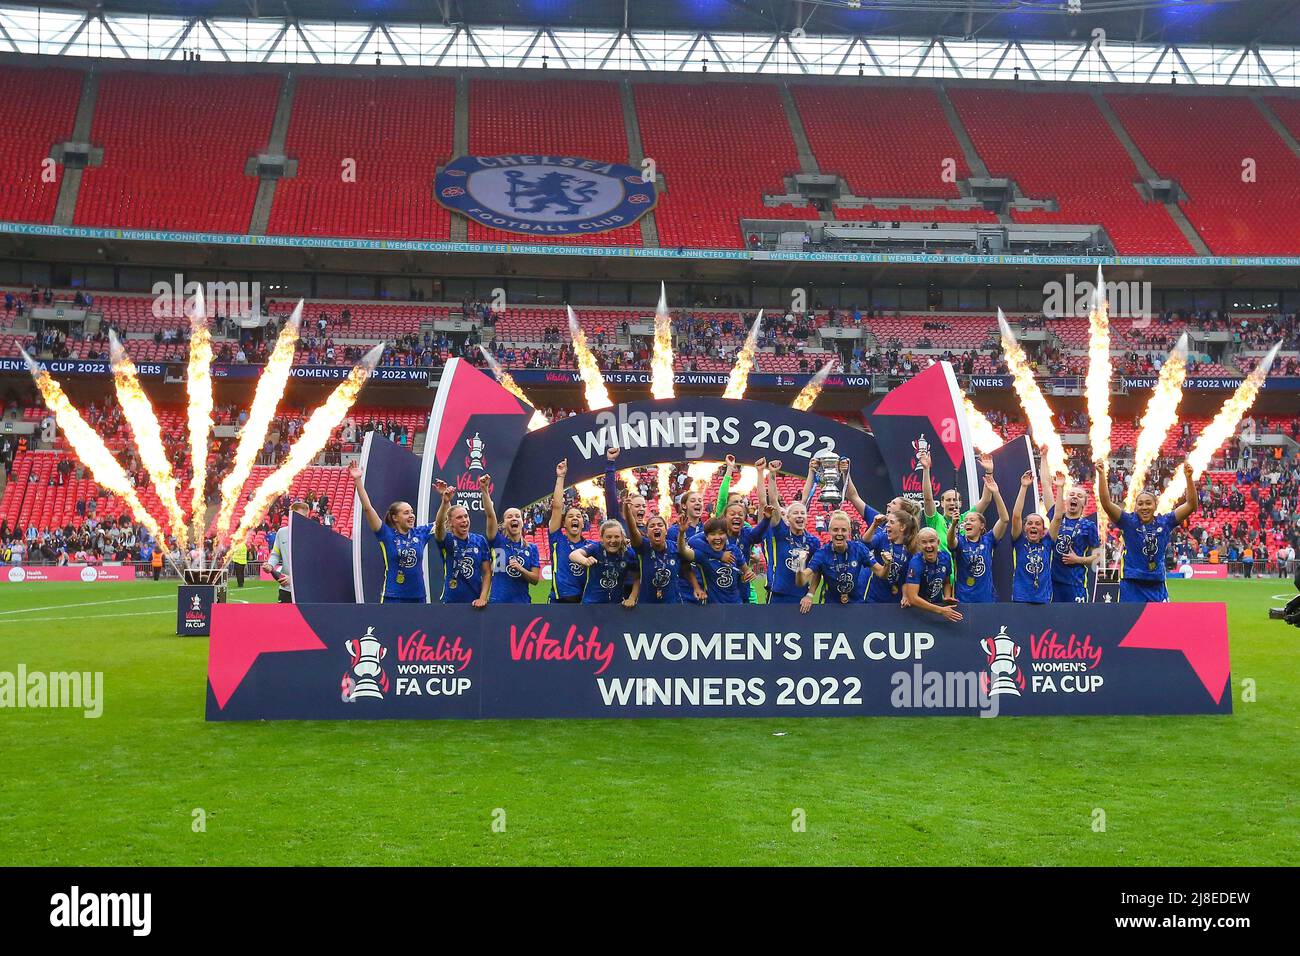 London, UK. 15th May 2022 ; Wembley Stadium, London England; Womens FA Cup  Final, Chelsea Women versus Manchester City Women: Chelsea players  celebrate with the Womens FA Cup trophy. Chelsea wins the